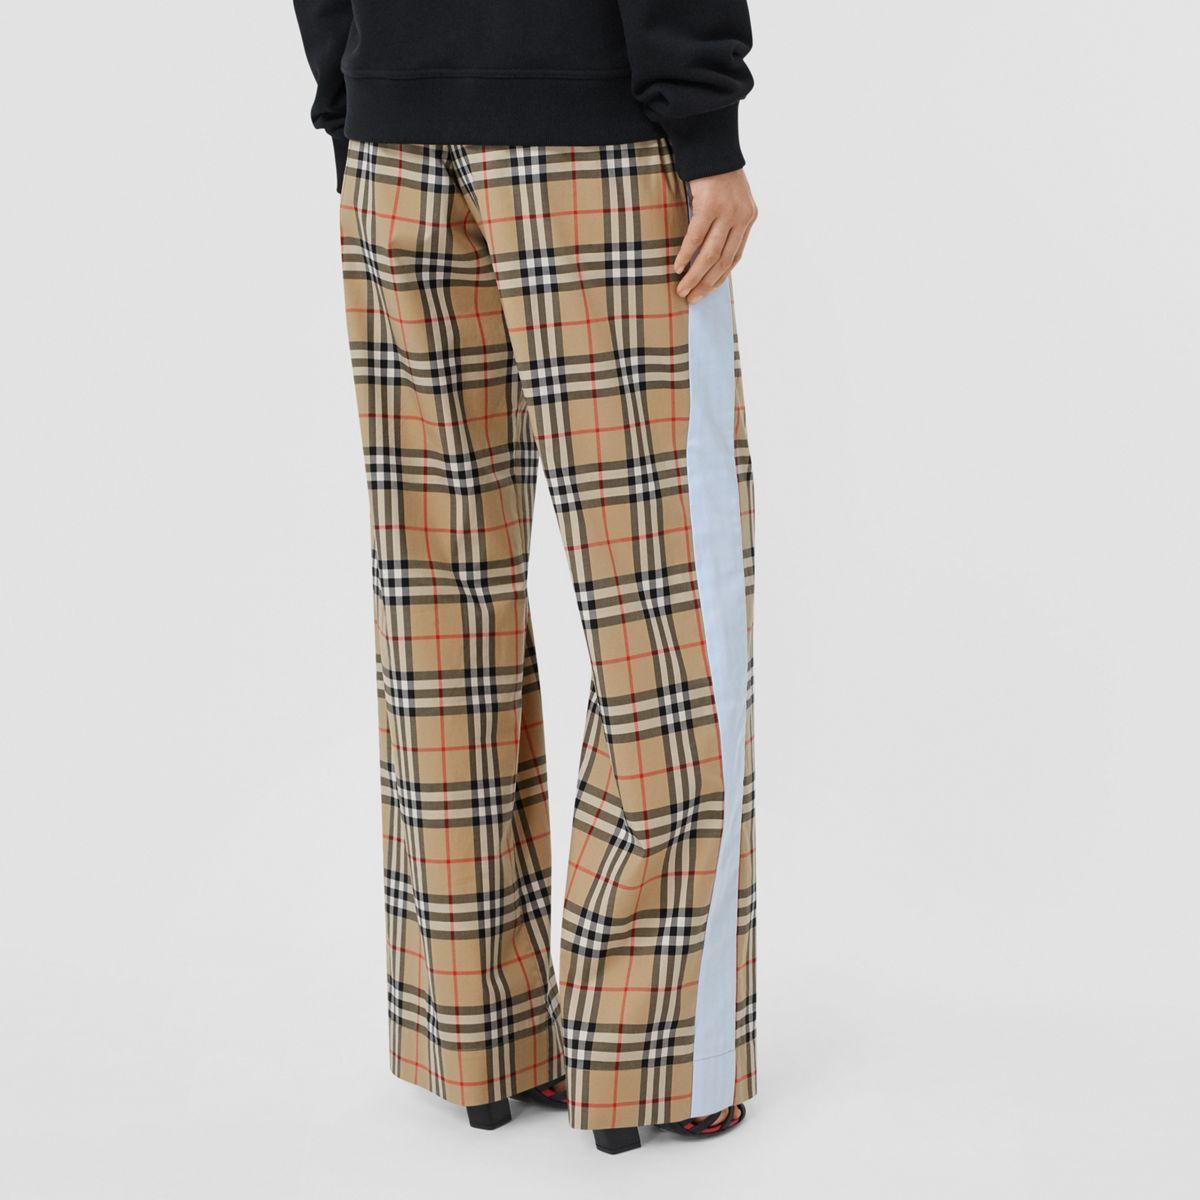 Burberry Vintage Check Stretch Cotton Trousers, Tartan Pattern in 